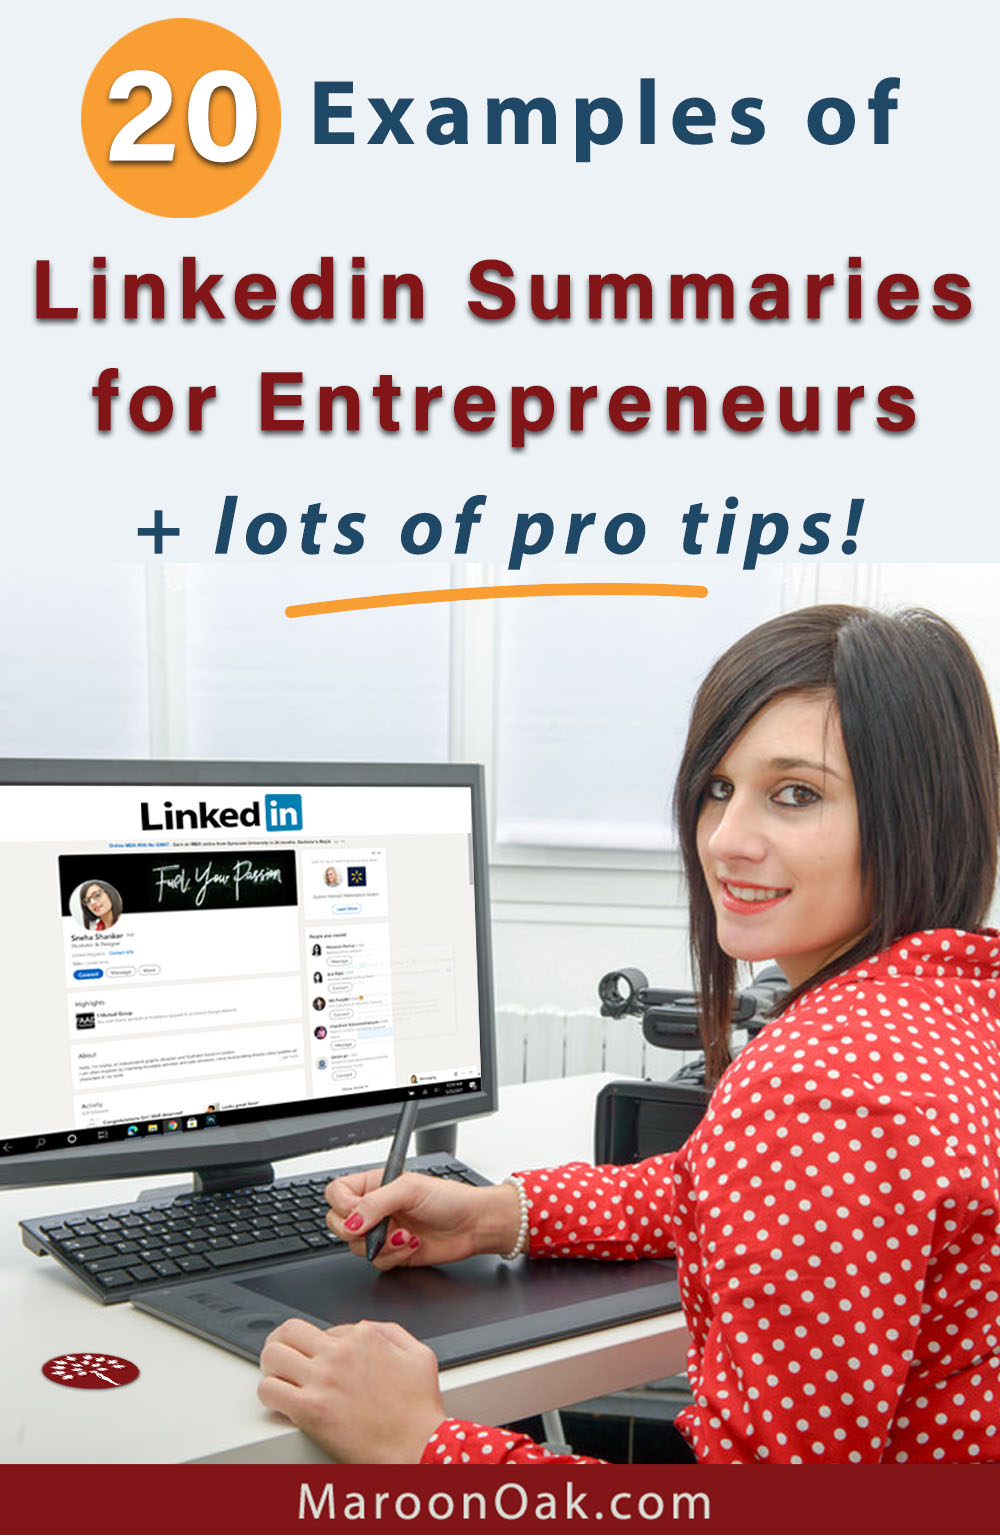 Create a strong LinkedIn Profile, starting with info About you. Explore the top tips and 20+ compelling LinkedIn Summary Examples for Entrepreneurs.